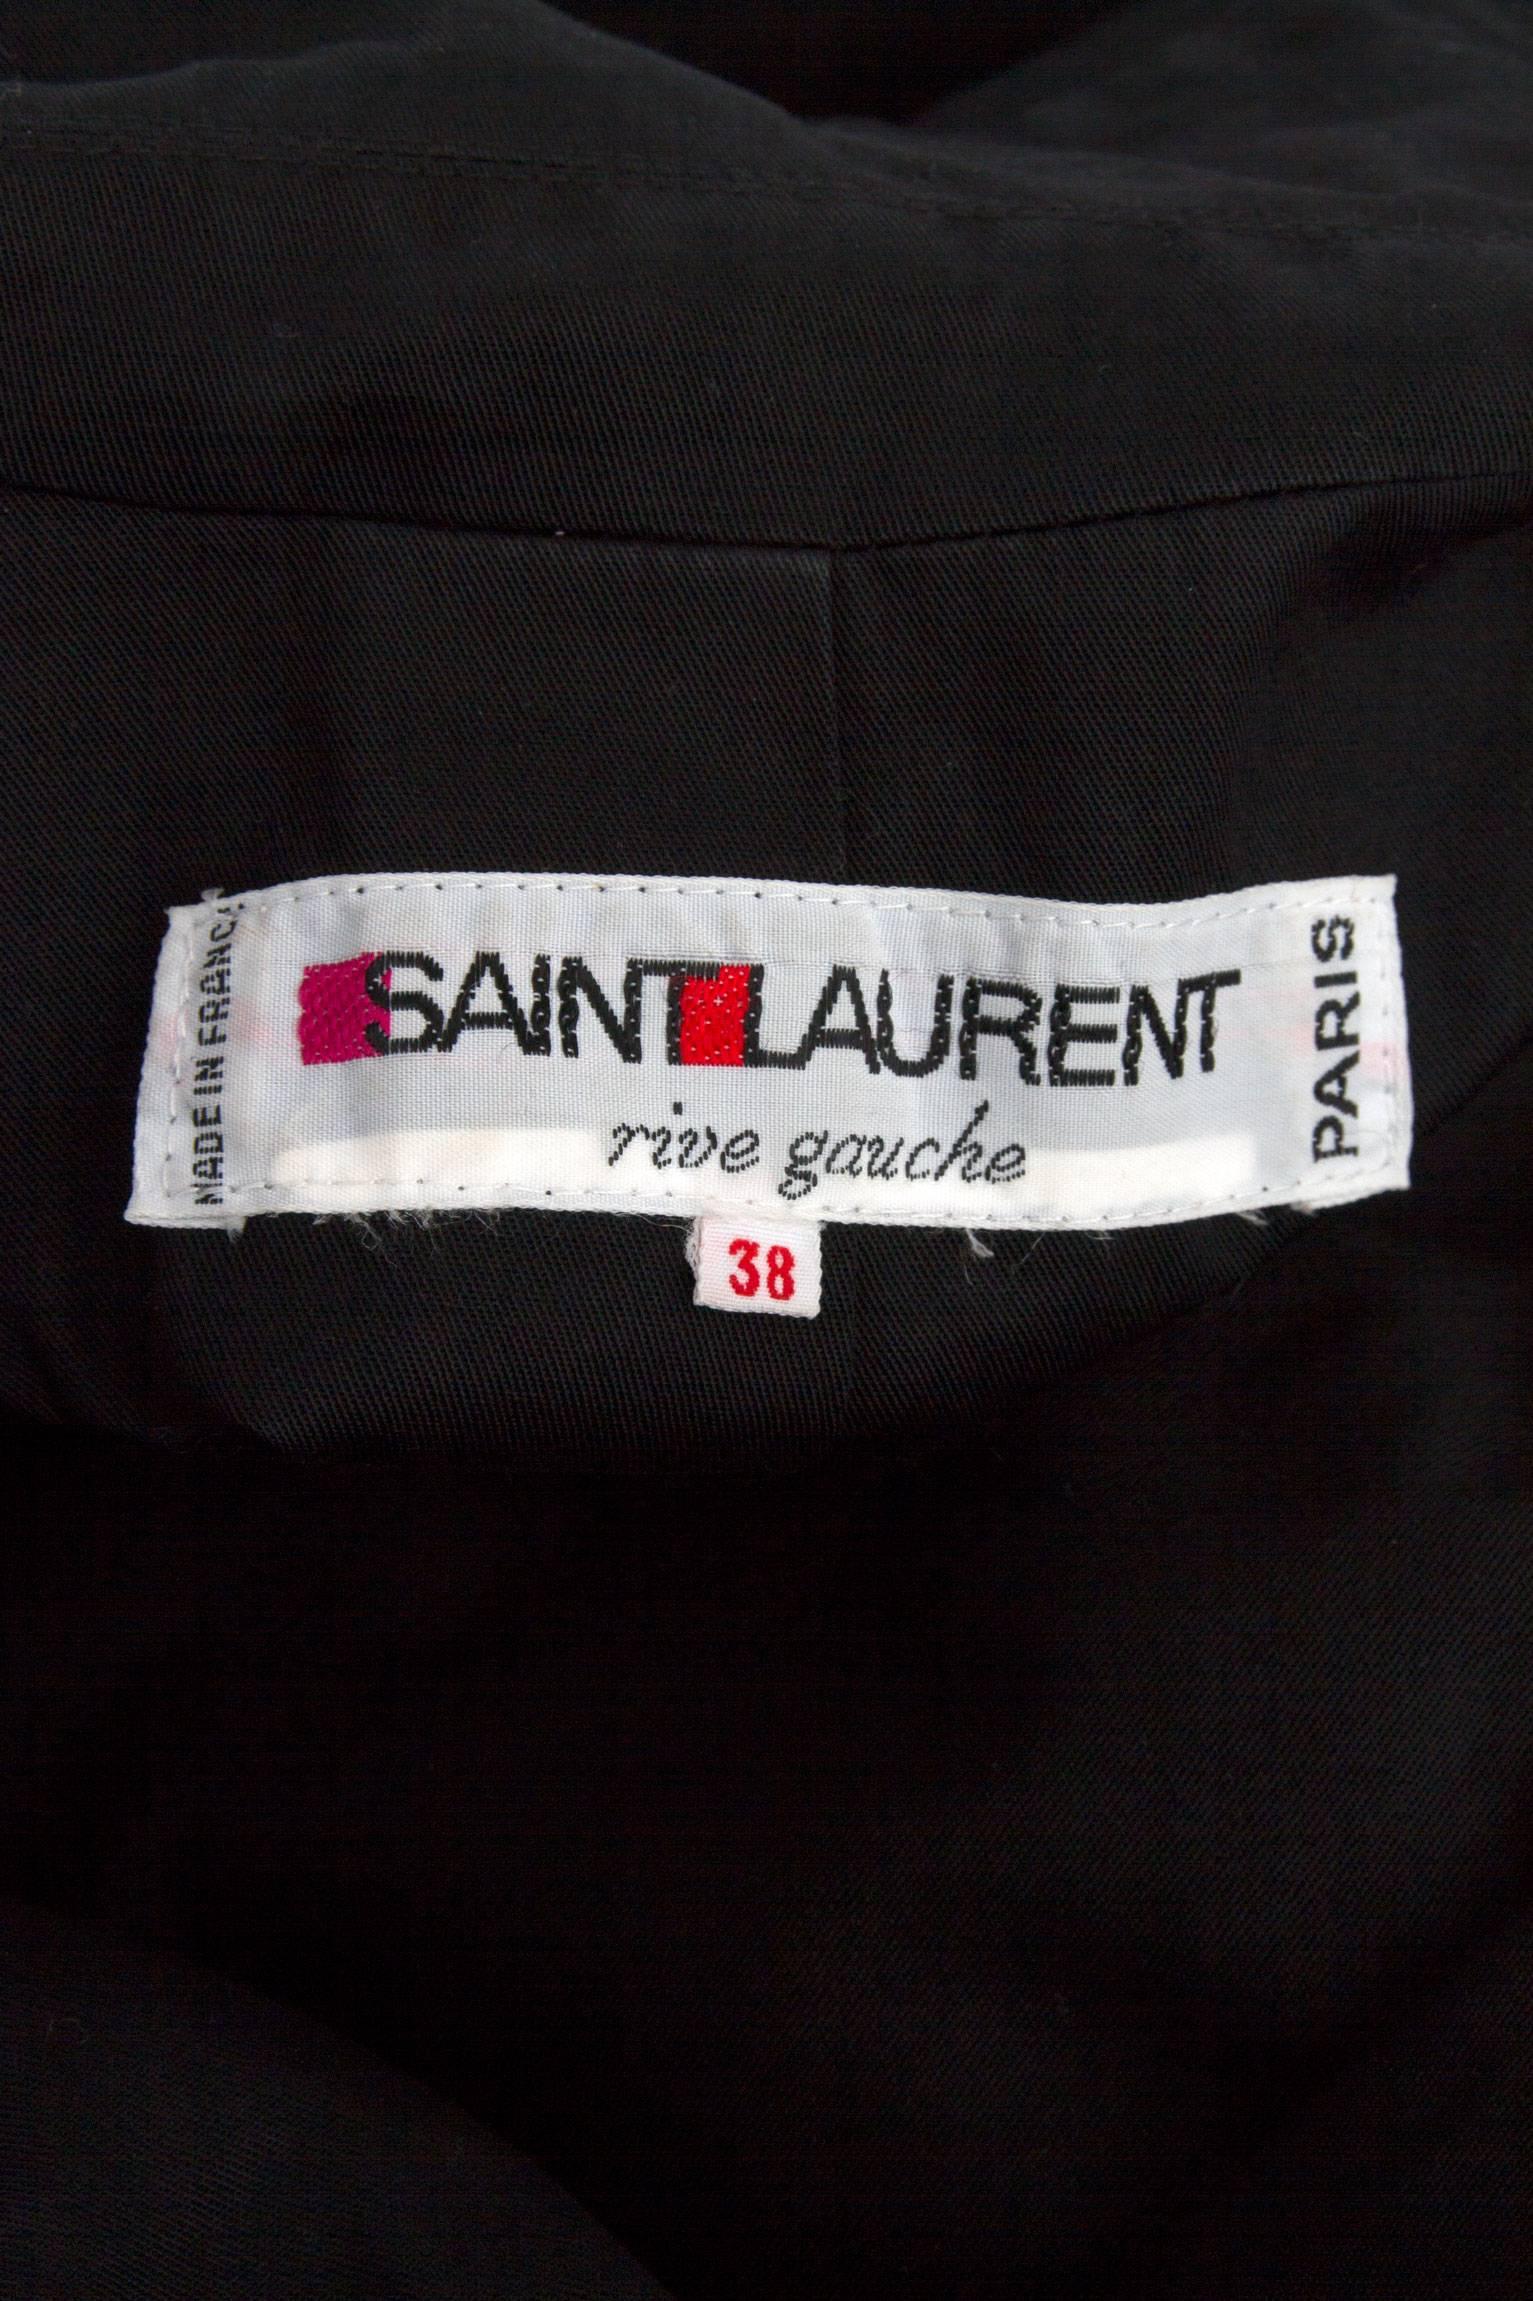 A 1970s Yves Saint Laurent double breasted black cotton trench coat with exaggerated lapels that gently cover the top of the bust and shoulders. A belt around the waist can be tied to define the waistline. The coat has one buttoned cuffs, is fully